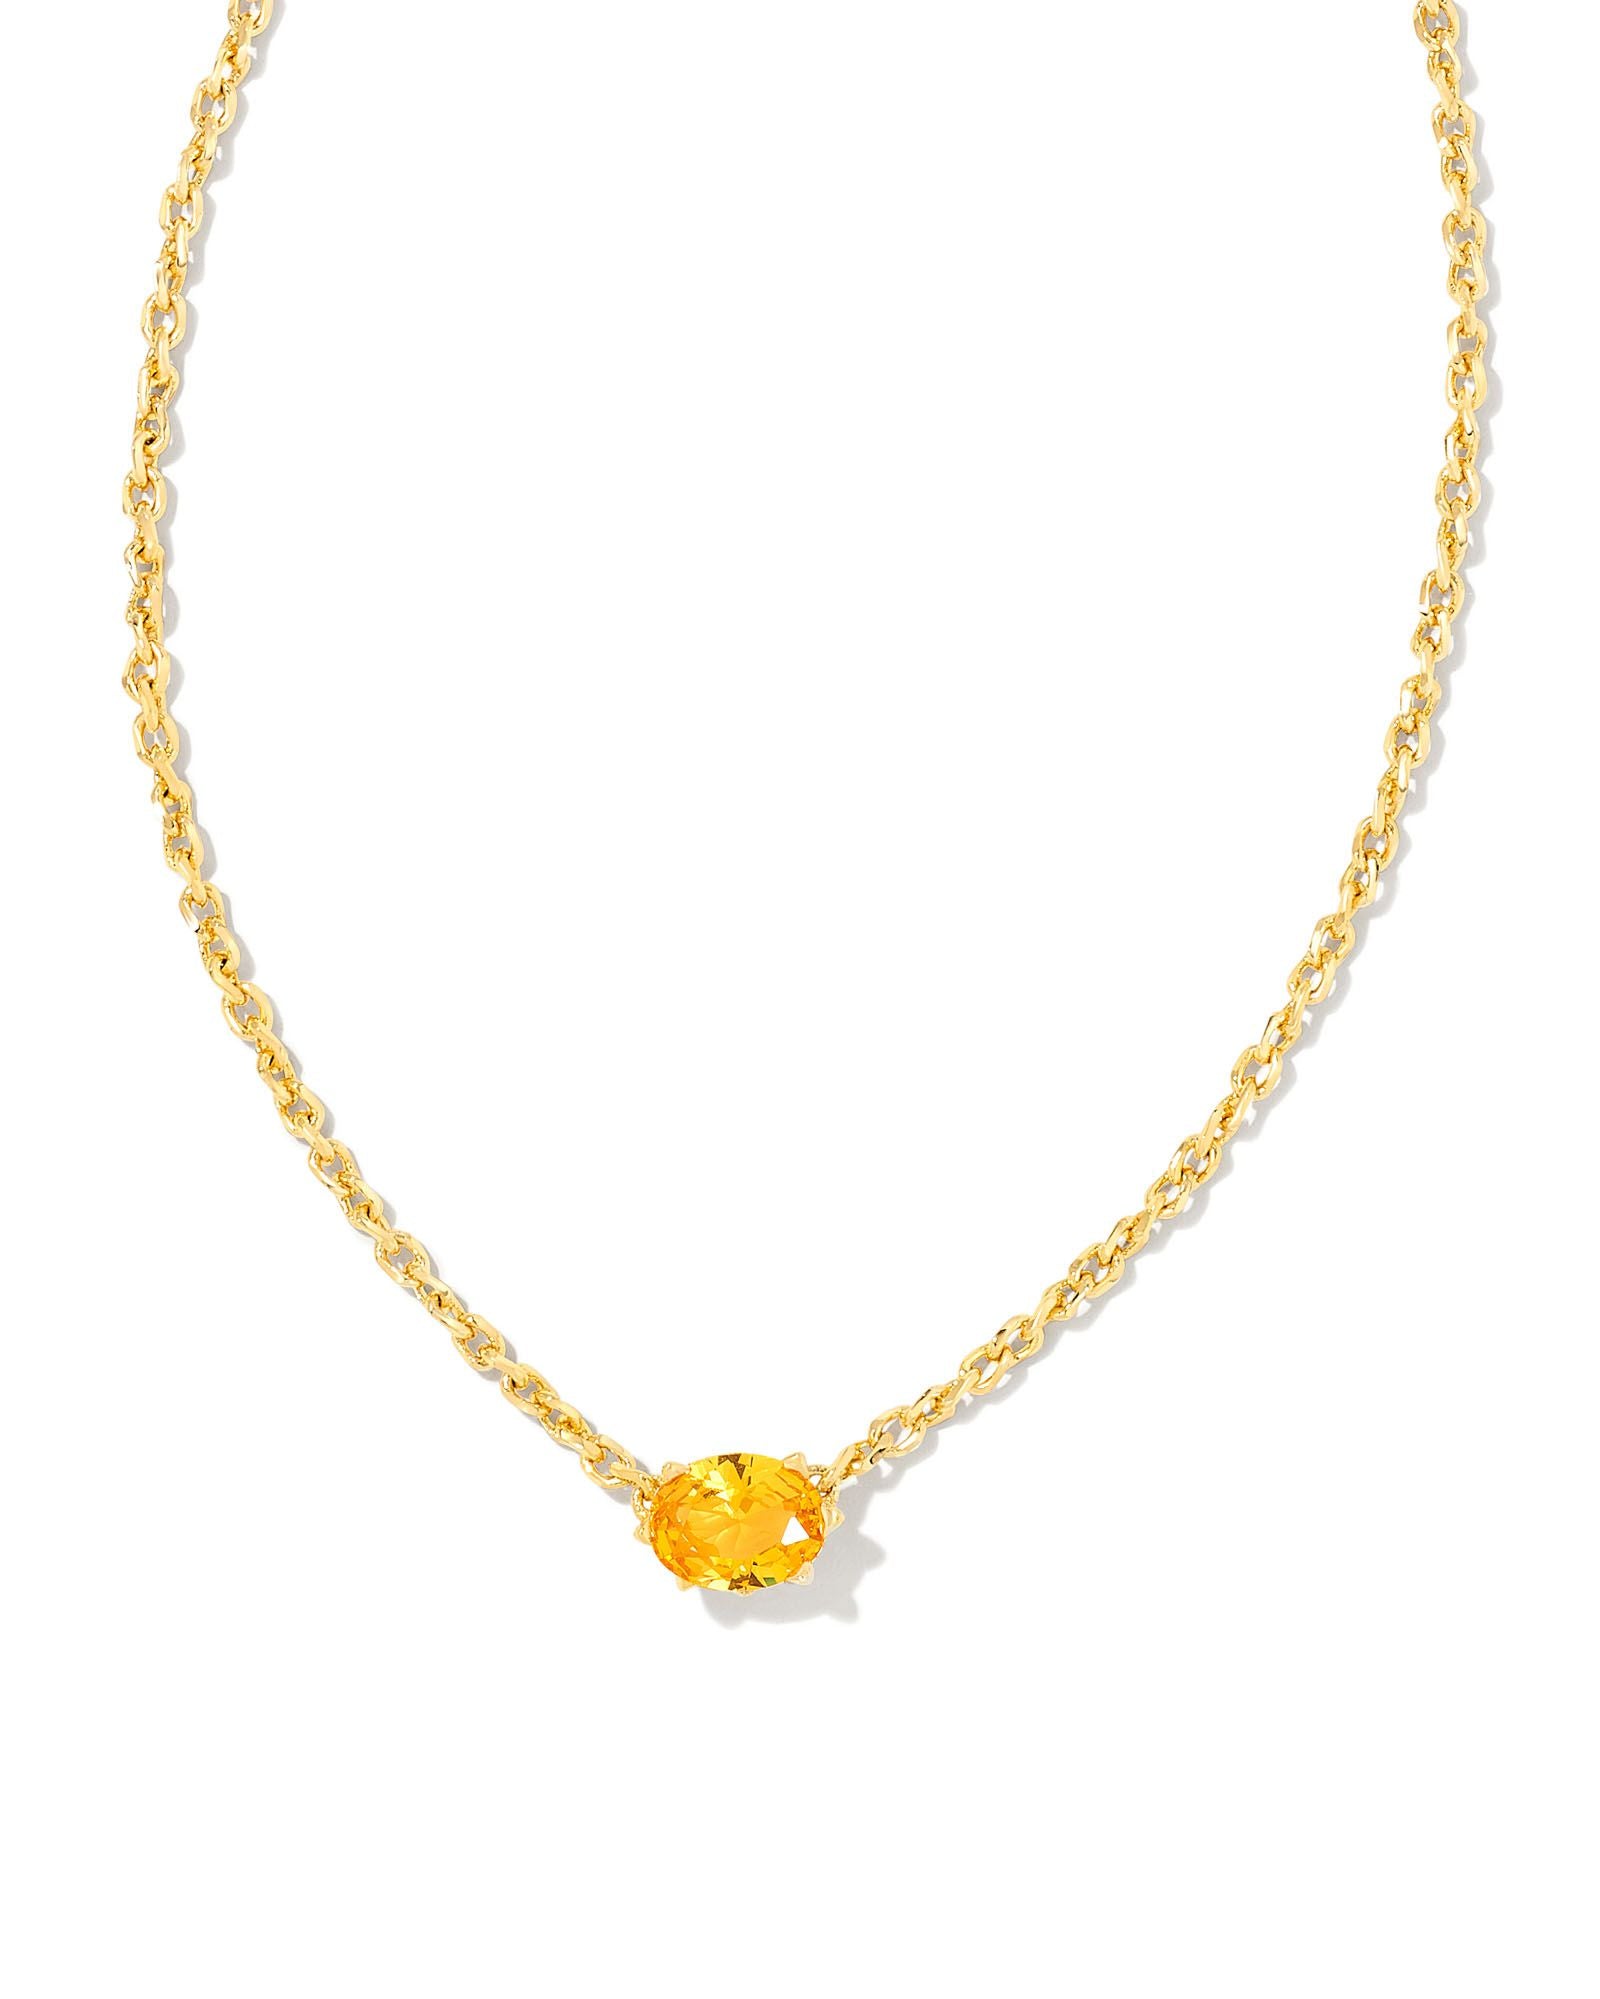 Cailin Golden Yellow Crystal Pendant Necklace